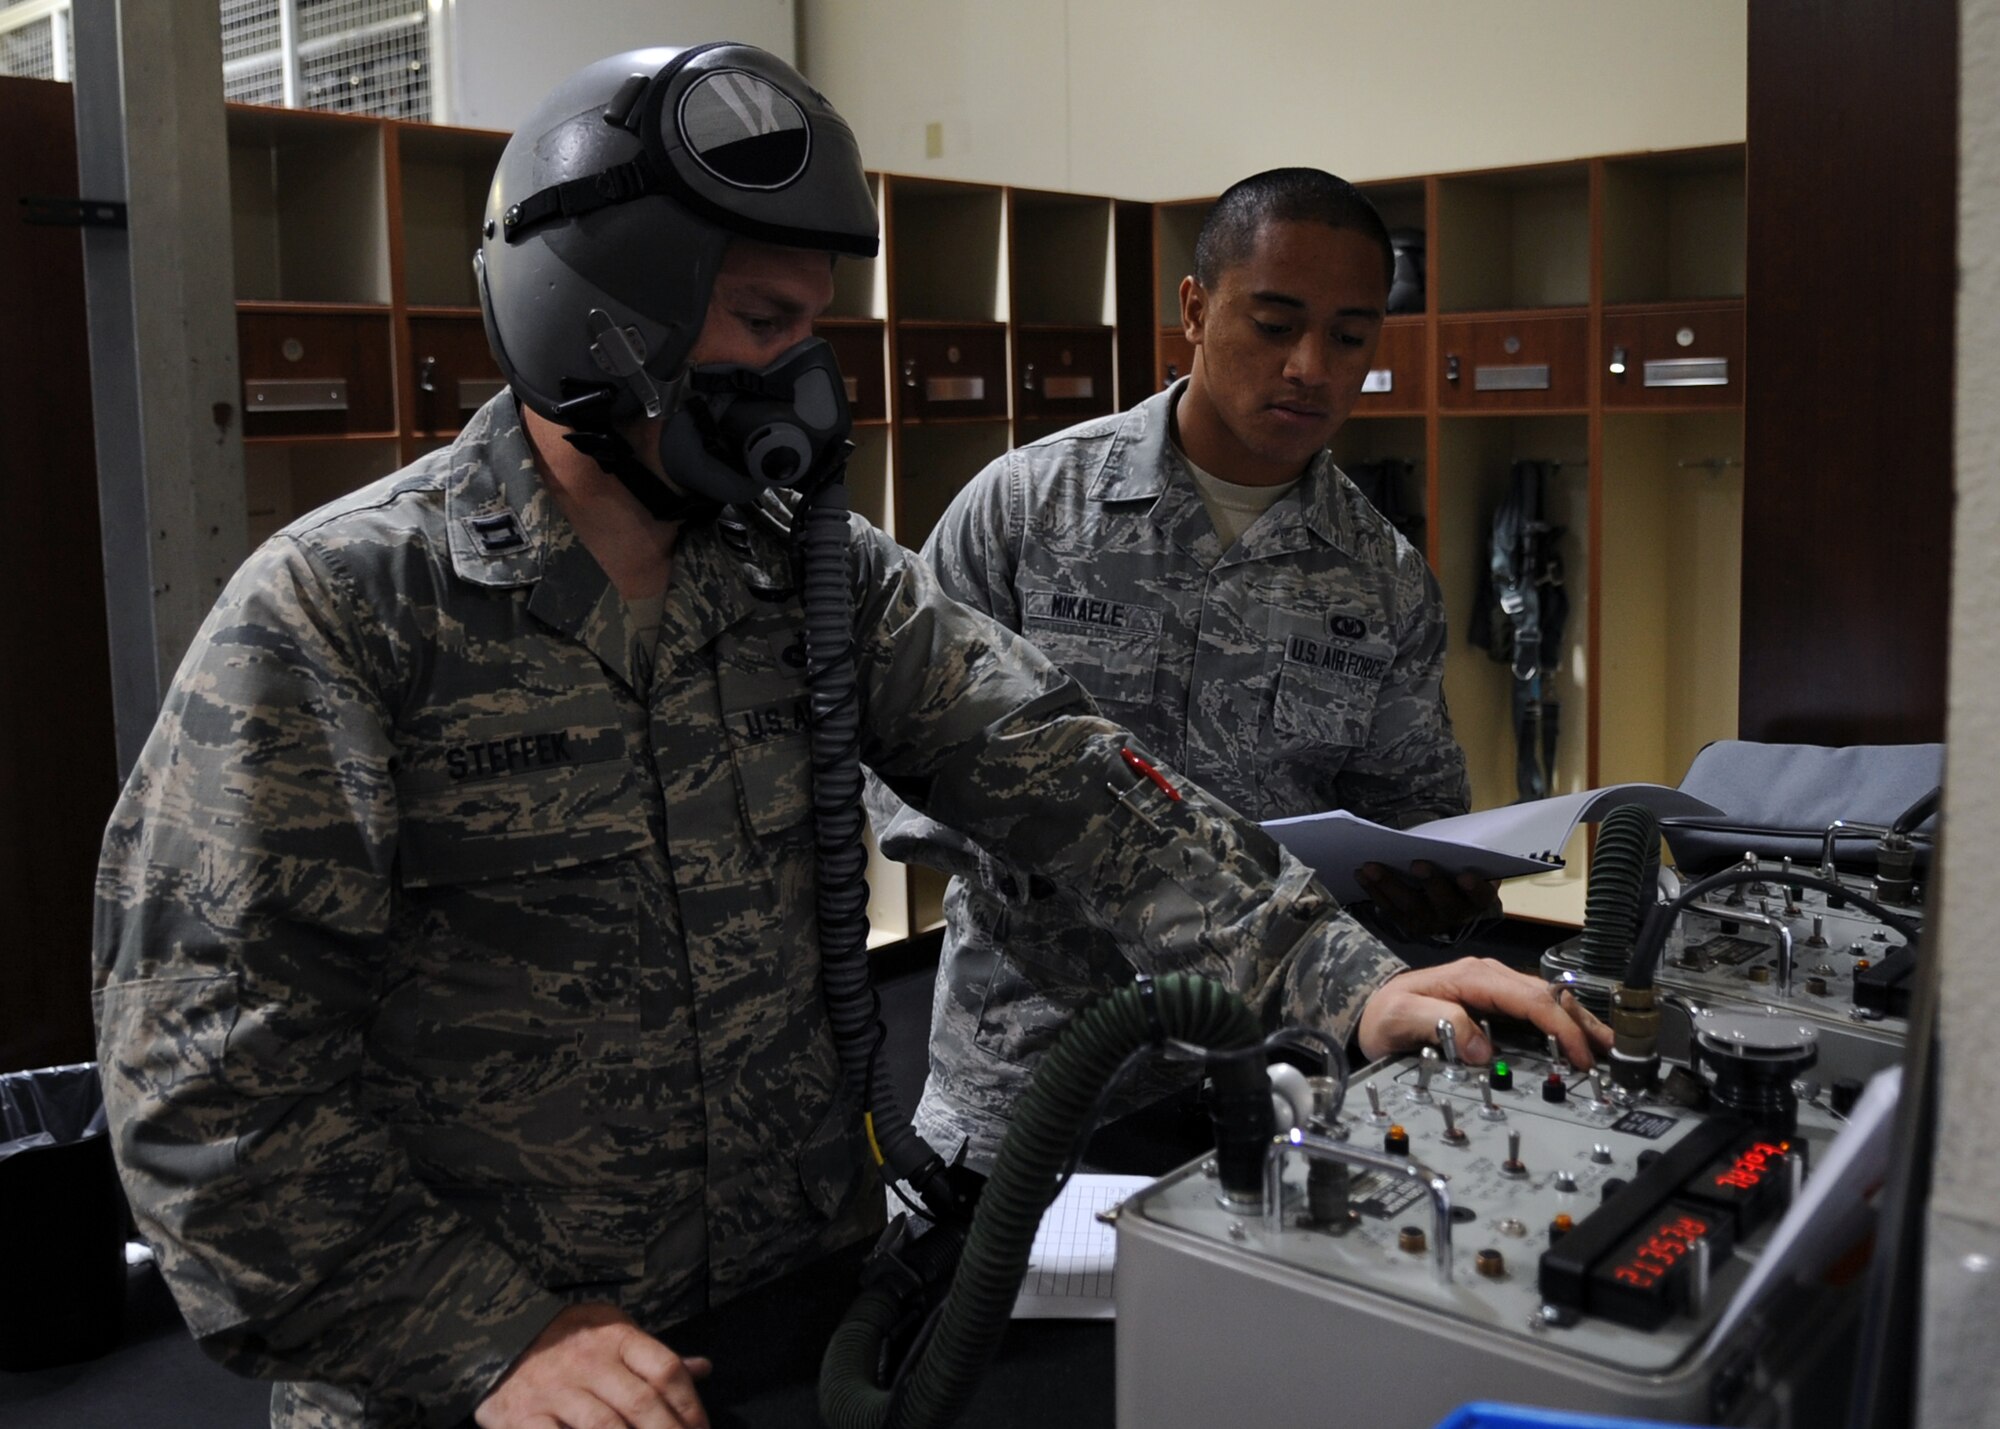 U.S. Air Force Airman 1st Class Pesamino Mikaele, right, assists Capt. Craig Steffak, both from the 7th Operations Support Squadron, with pre-flighting his flight helmet and mask Oct. 29, 2013, at Dyess Air Force Base, Texas. This procedure ensures aircrew member’s microphone works correctly and the oxygen mask fits properly prior to flight. (U.S. Air Force photo by Senior Airman Shannon Hall/Released)